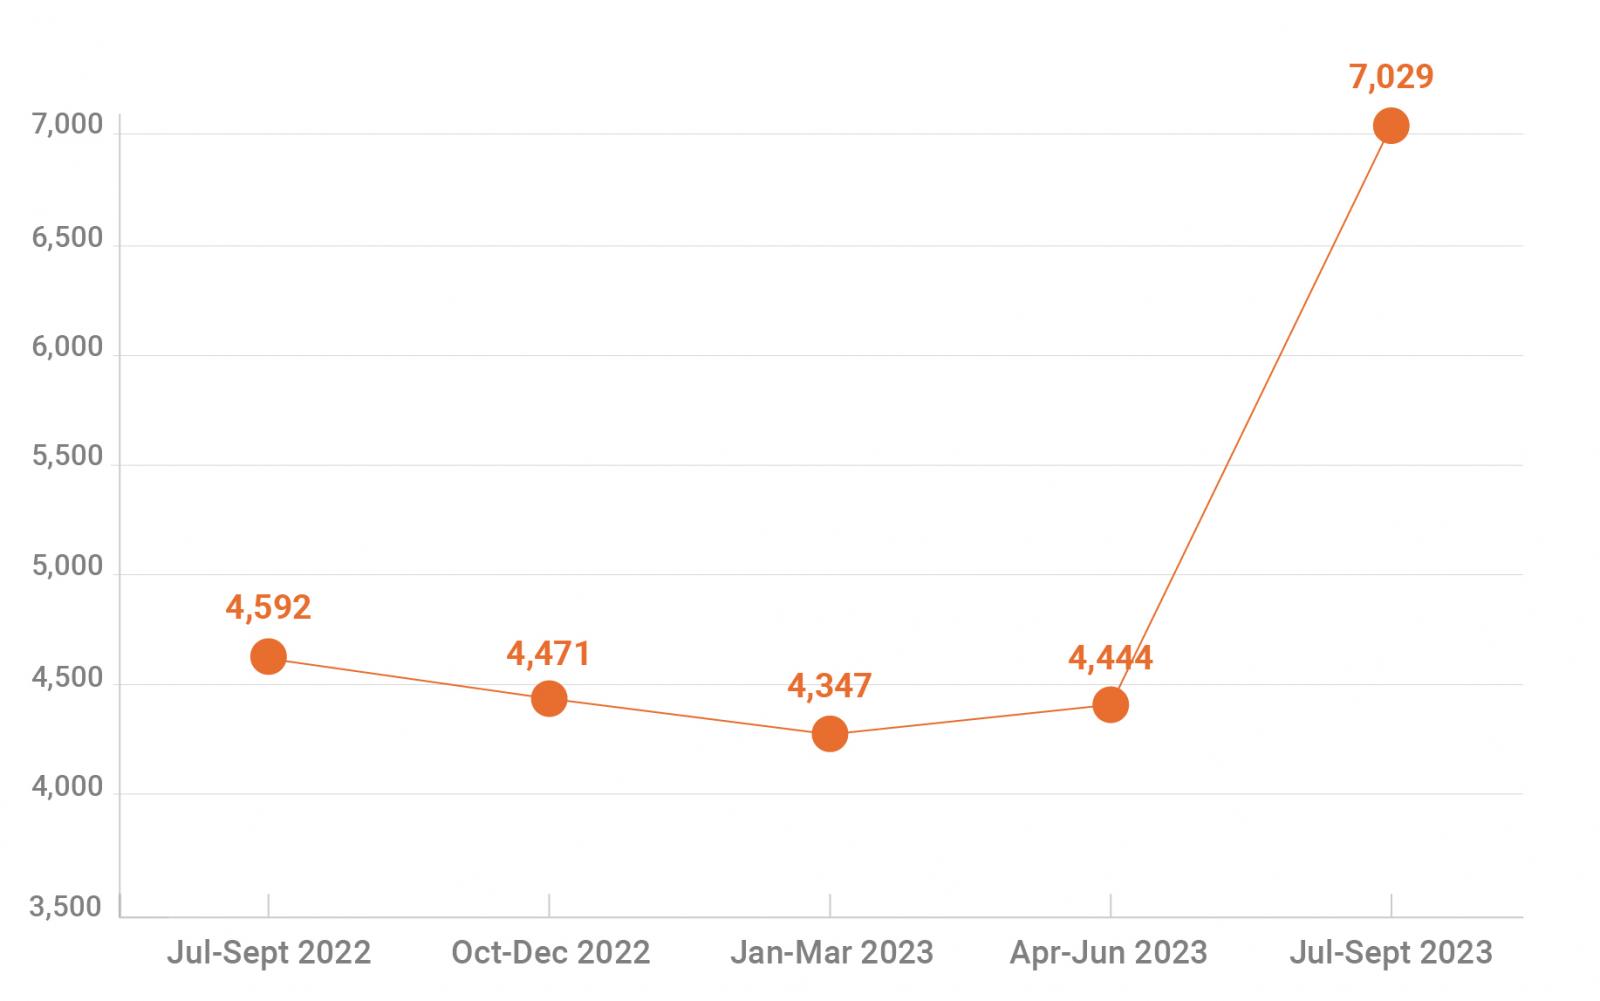 Chart showing complaints received over five quarters from July 2022 to September 2023